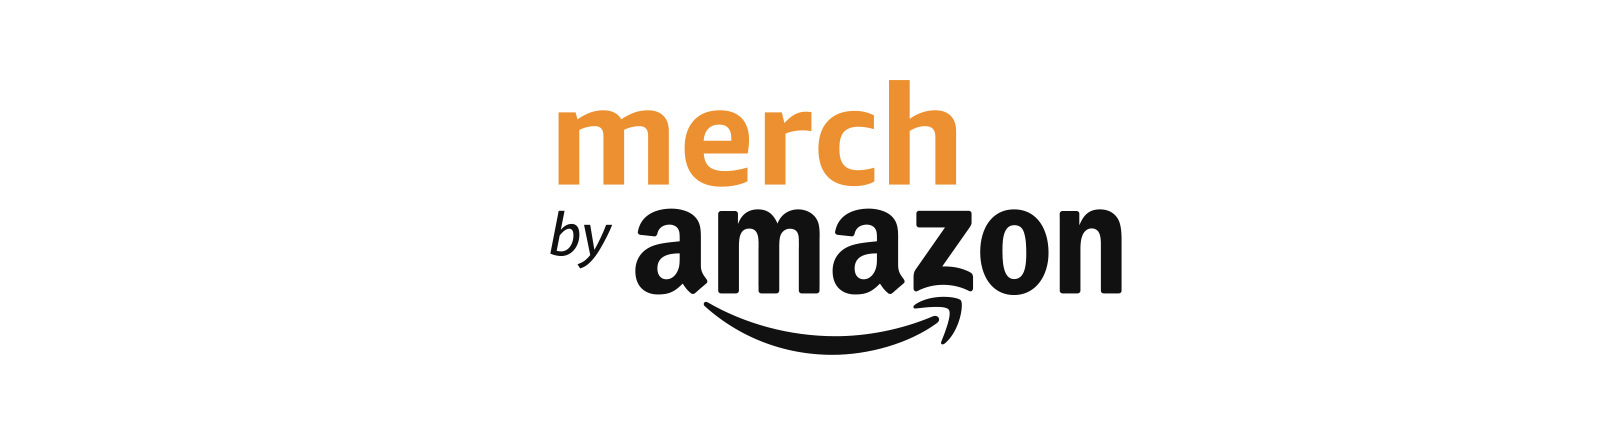 How to Get Accepted in Merch by Amazon in 2022